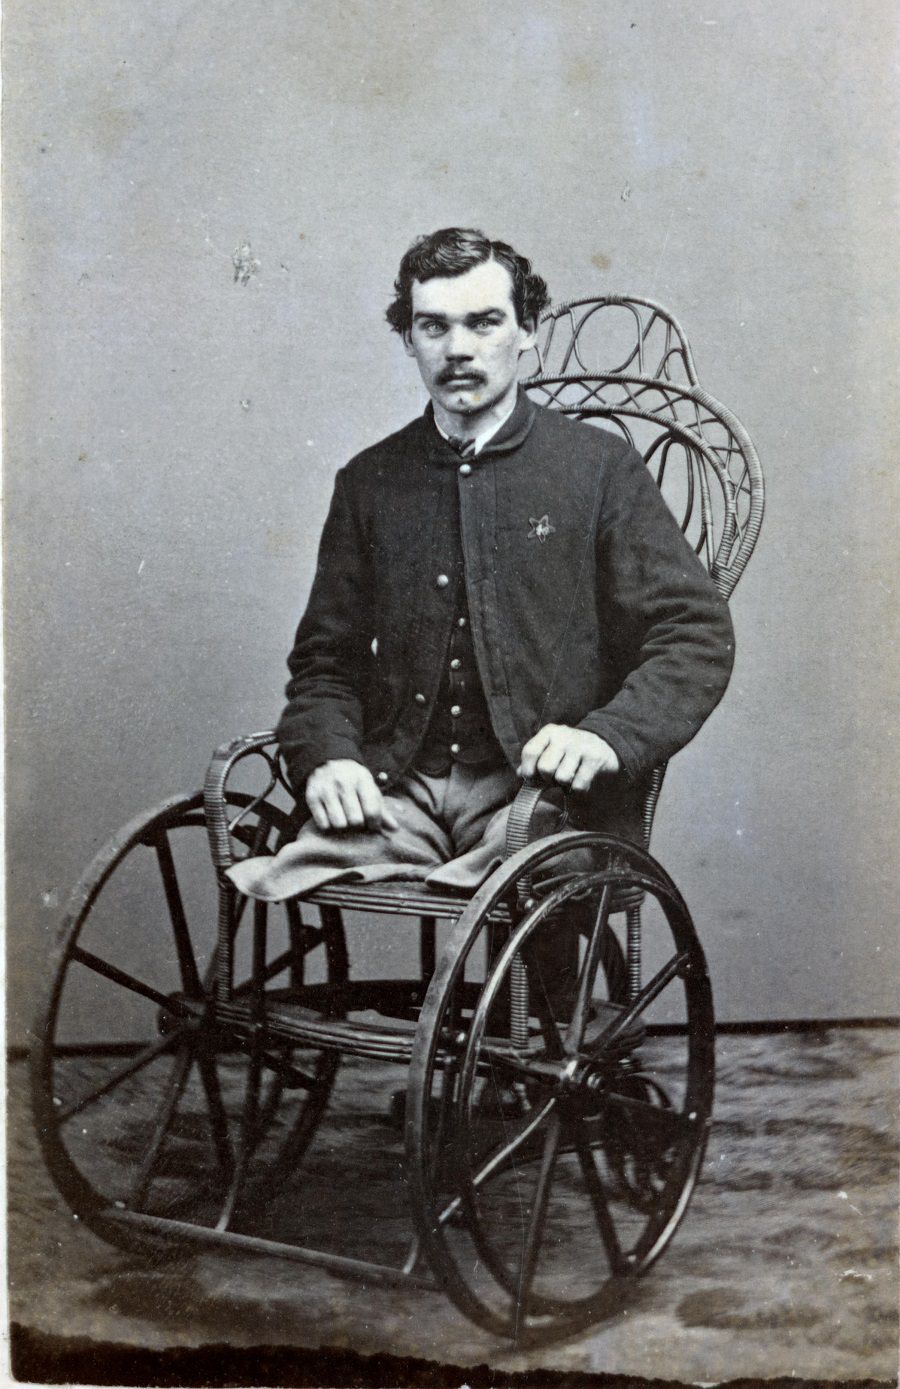 Corporal Michael Dunn of Co. H, 46th Pennsylvania Infantry Regiment, after the amputation of his legs in 1864.